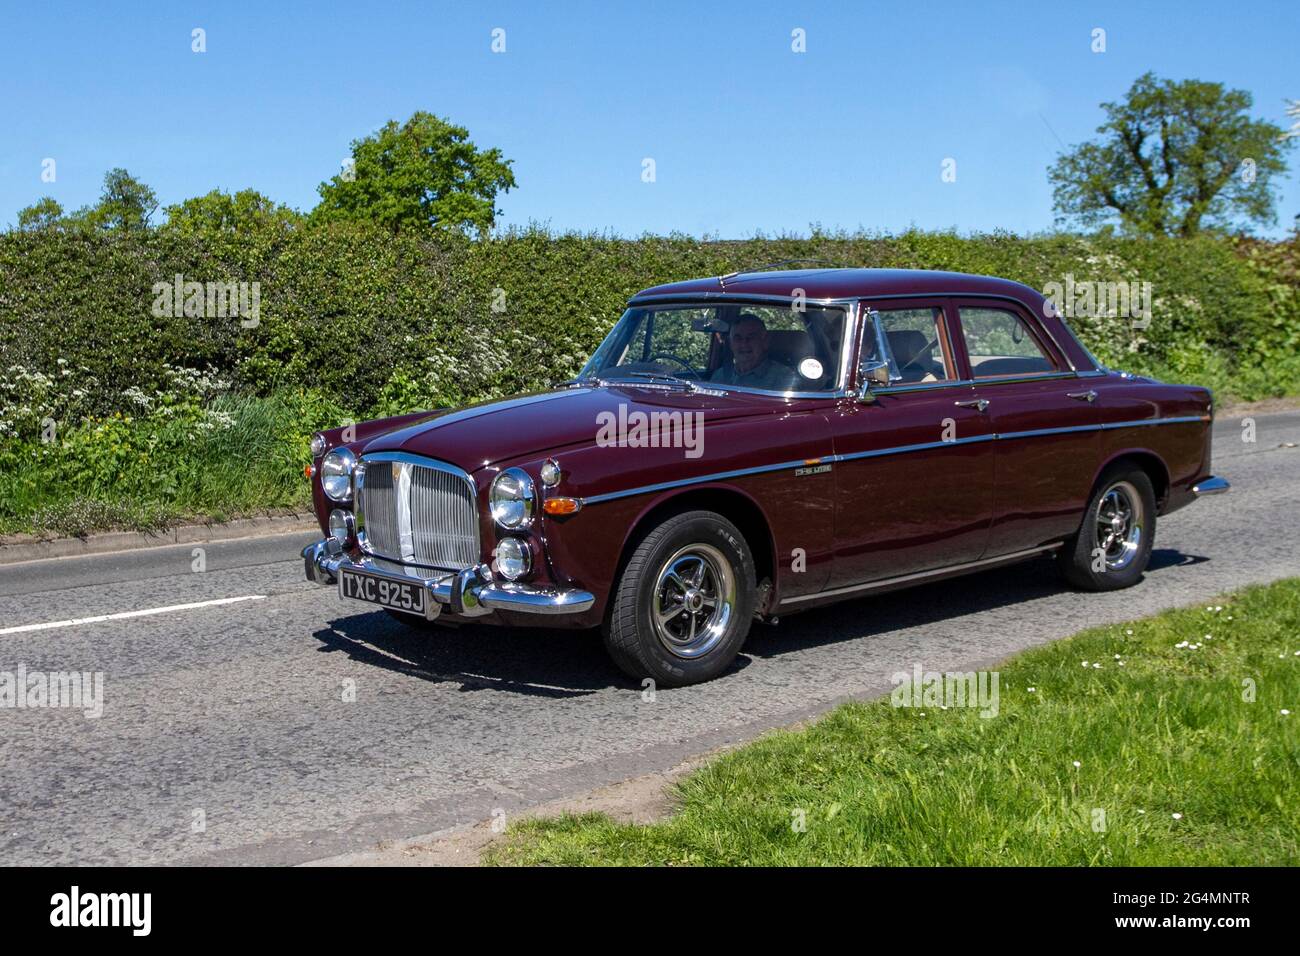 1971 70s red maroon Rover 3.5 litre, 4dr luxury saloon 3528cc petrol vehicle en-route to Capesthorne Hall classic May car show, Cheshire, UK Stock Photo